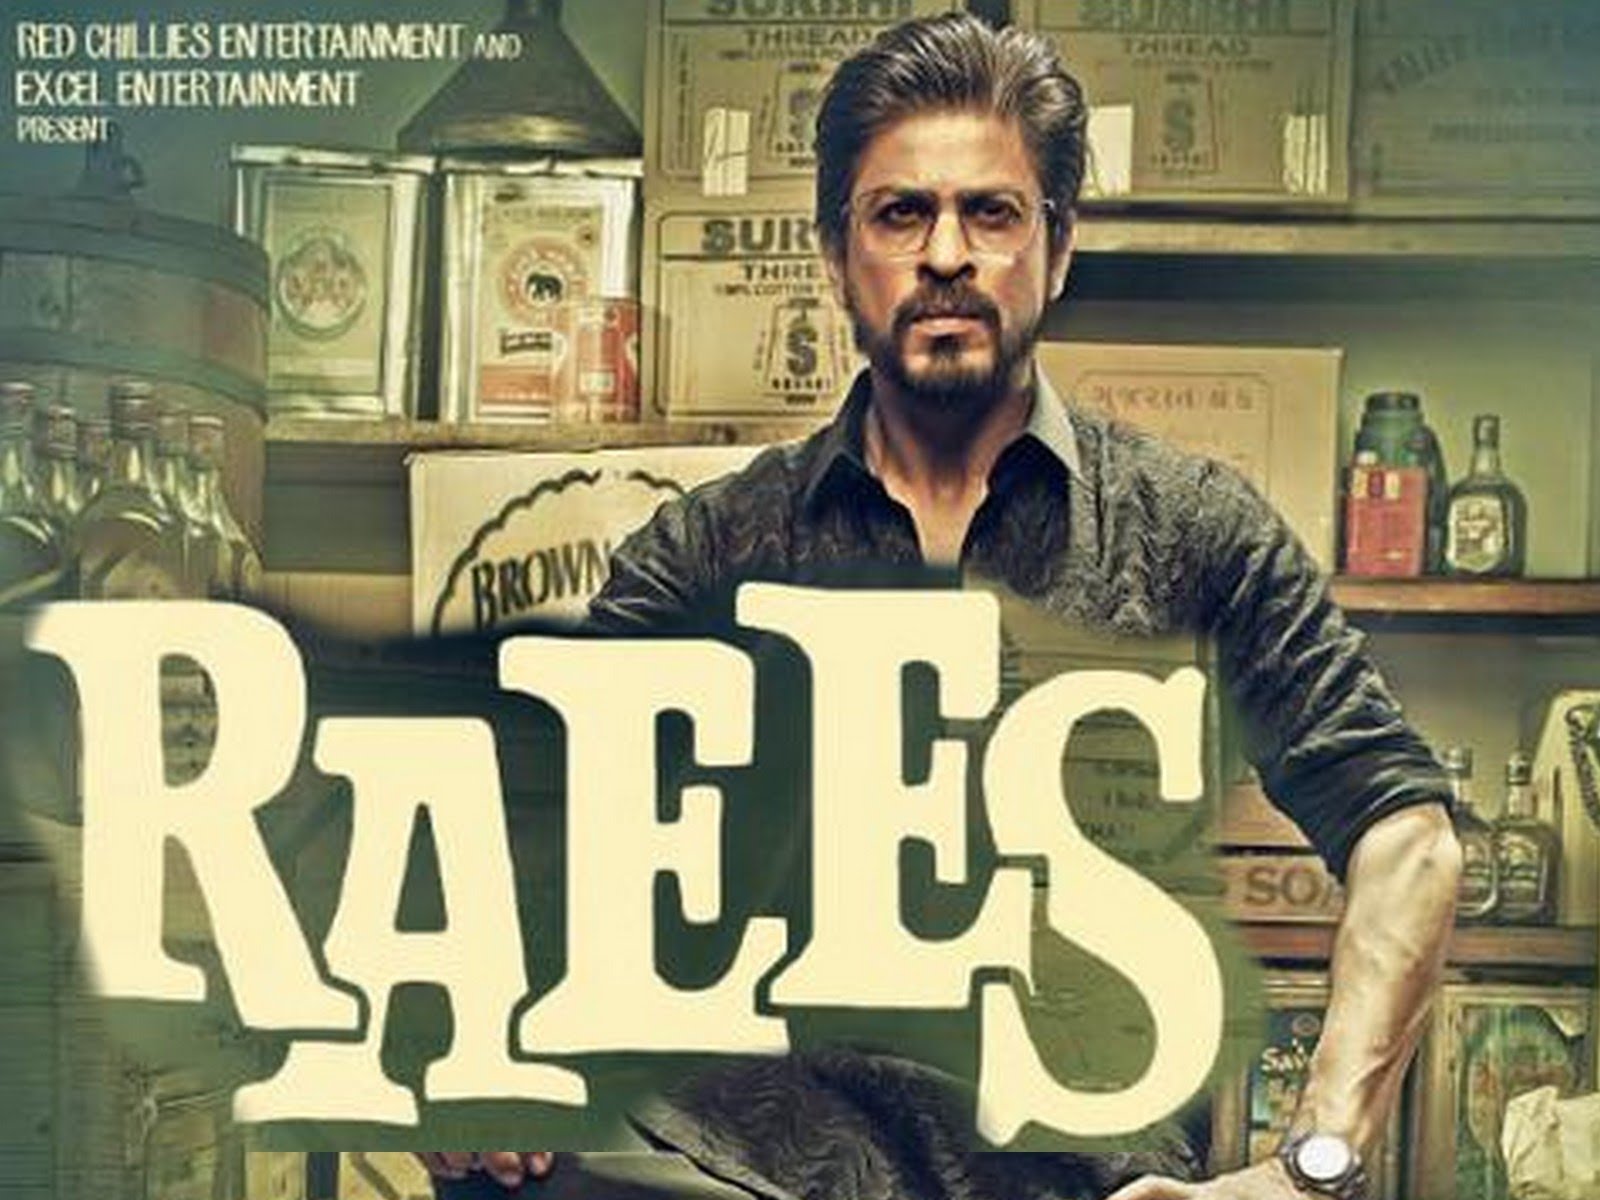 New Action Trailer of Film “Raees” Releases 2017